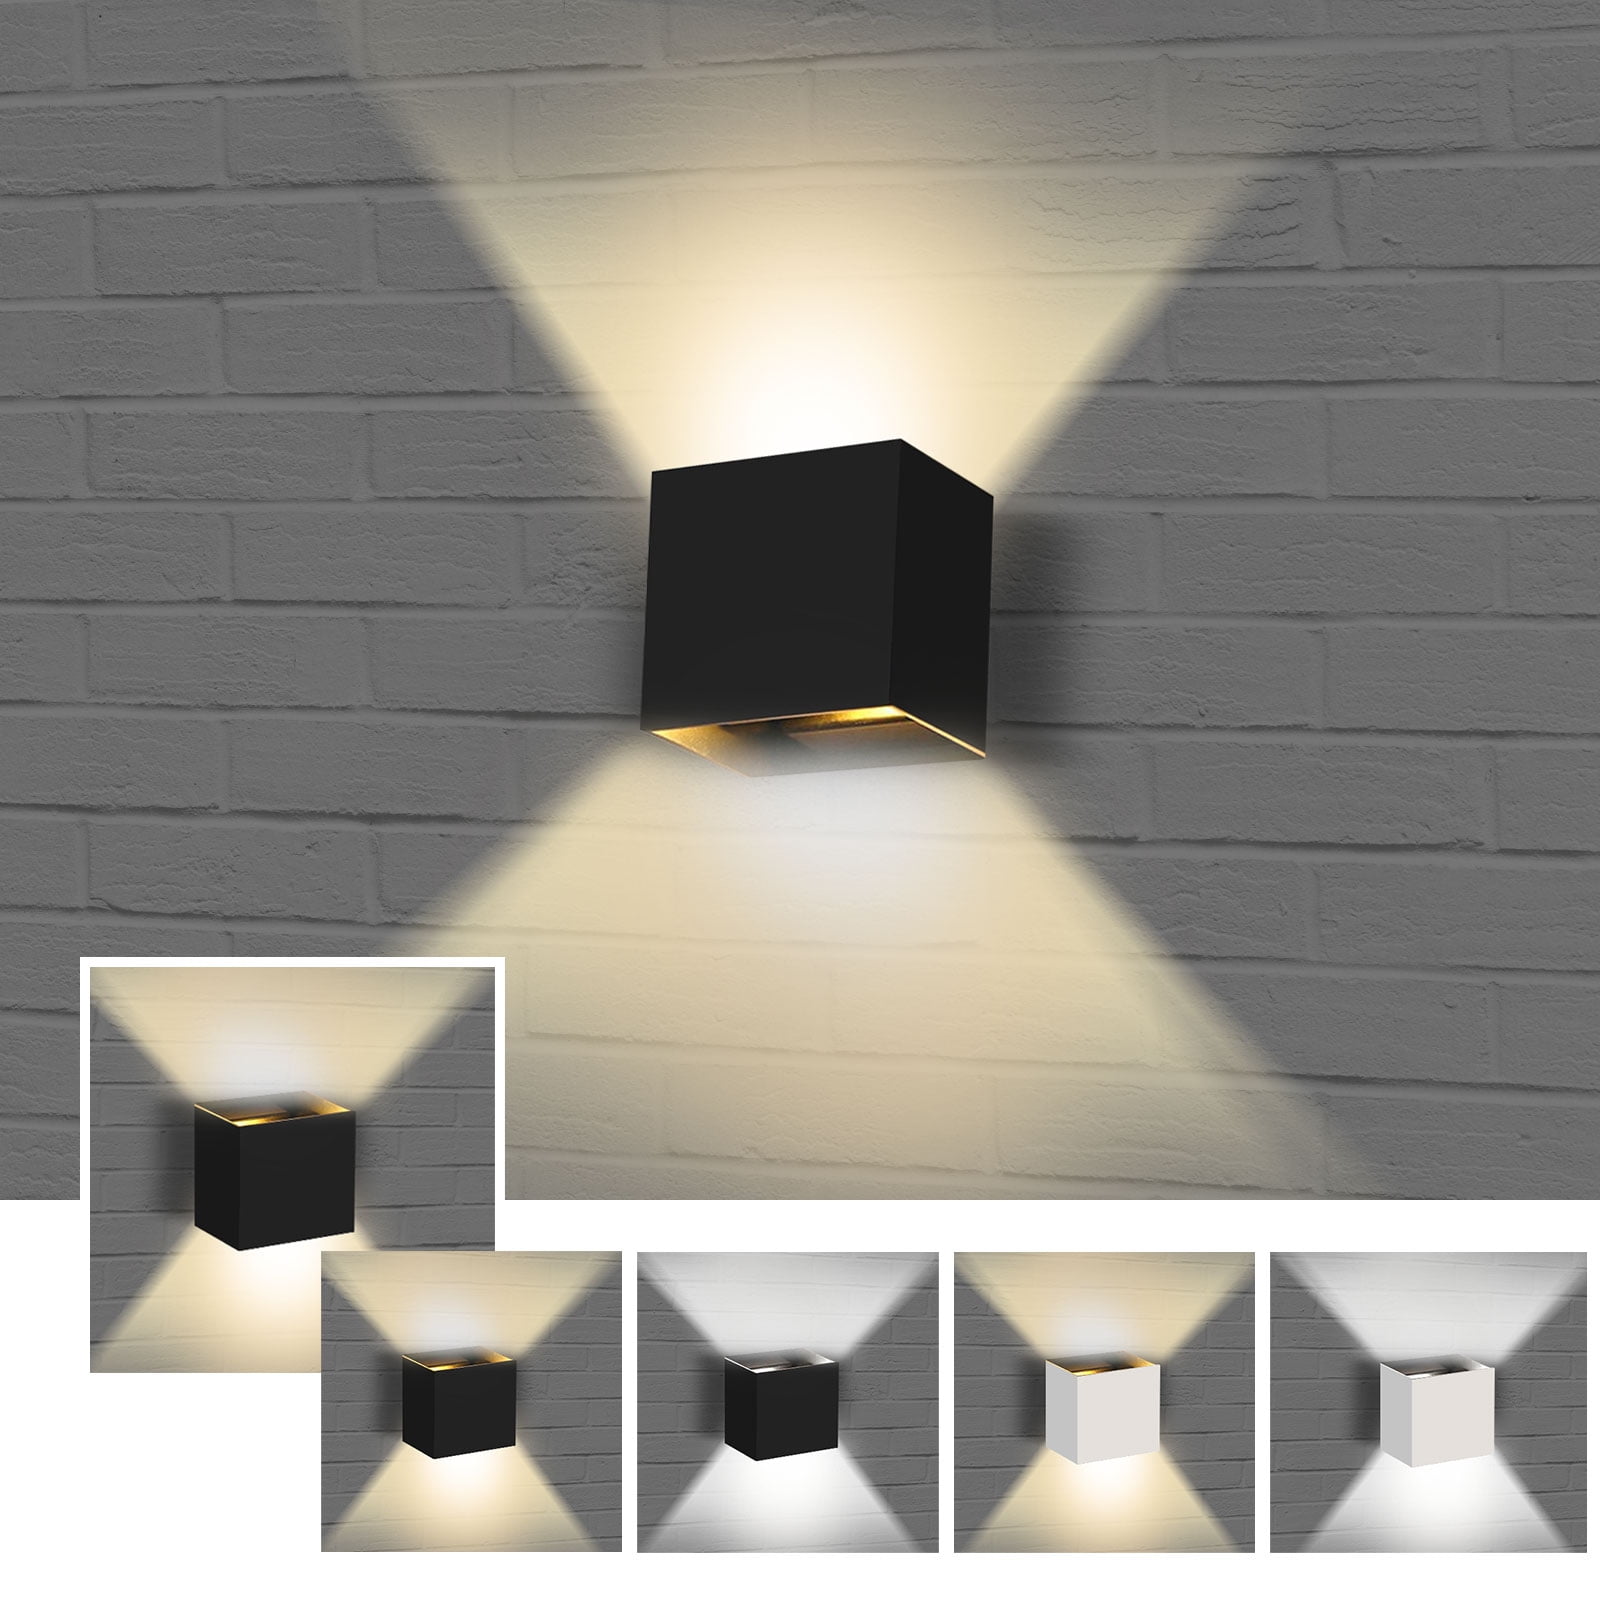 Details about   2PCS Cube LED Wall Lights Modern Up Down Sconce Lighting Fixture Corded Lamp US 